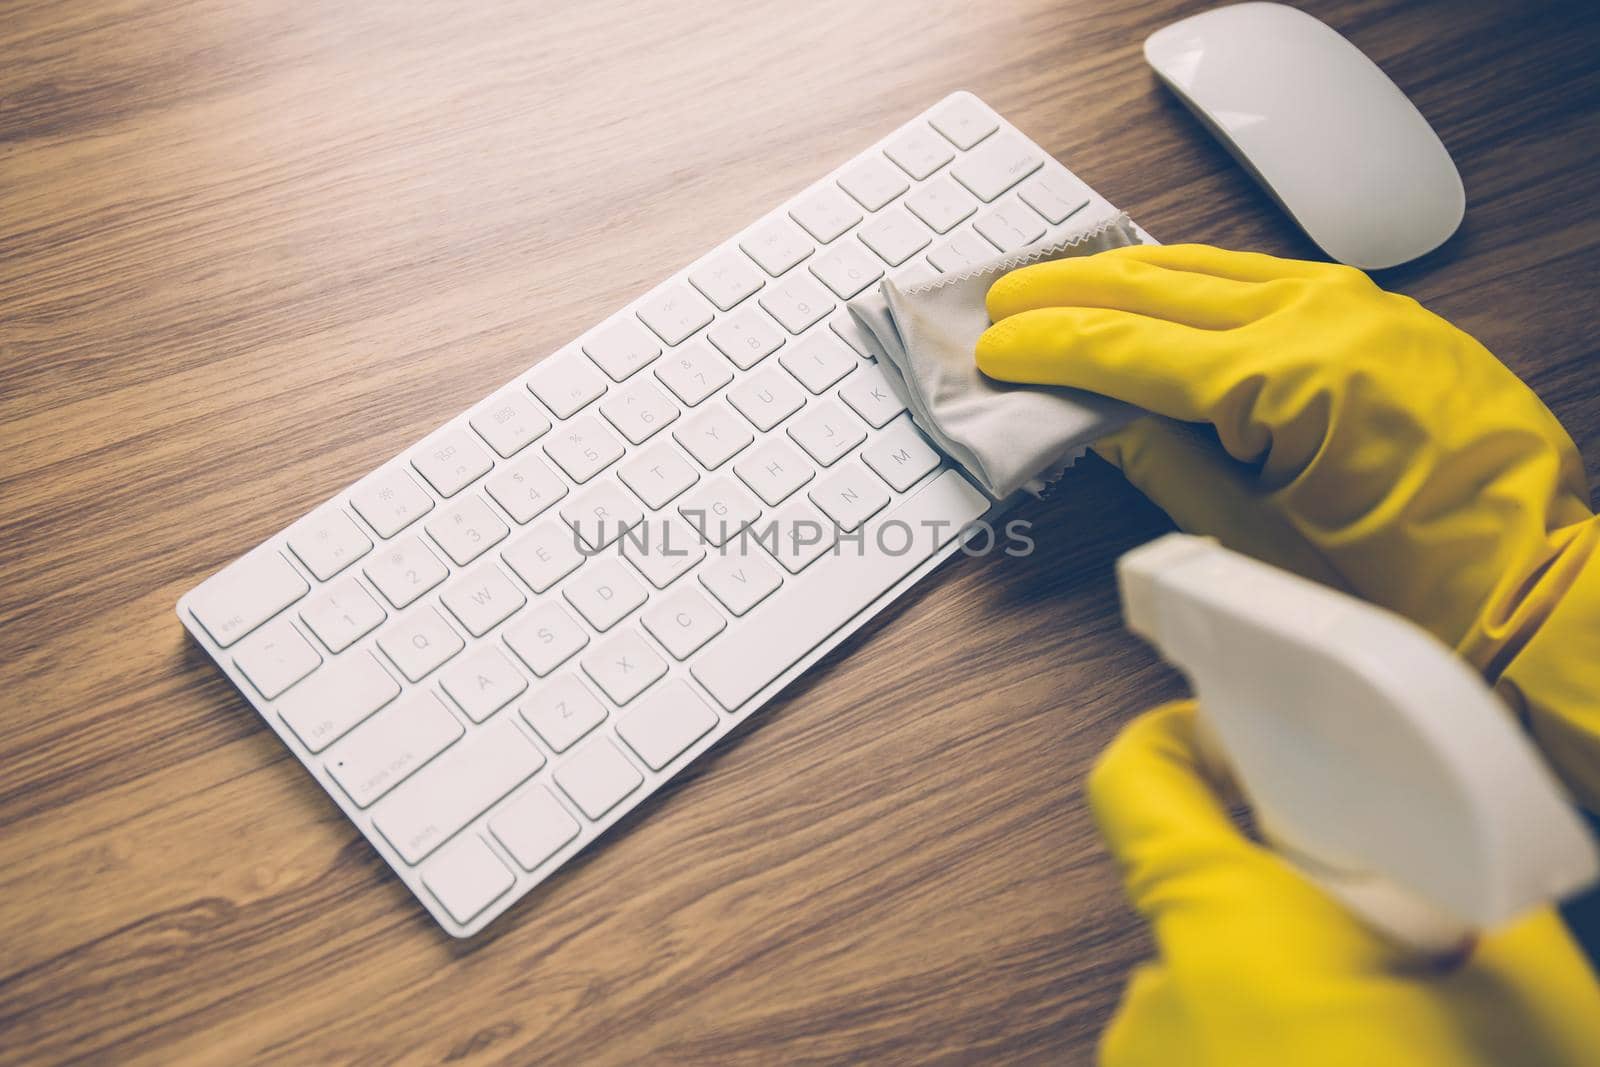 Hand of man cleaning keyboard computer with antibacterial for protect epidemic disease covid-19, fabric having antiseptic alcohol clean and wash laptop for on desk, business and health concept.